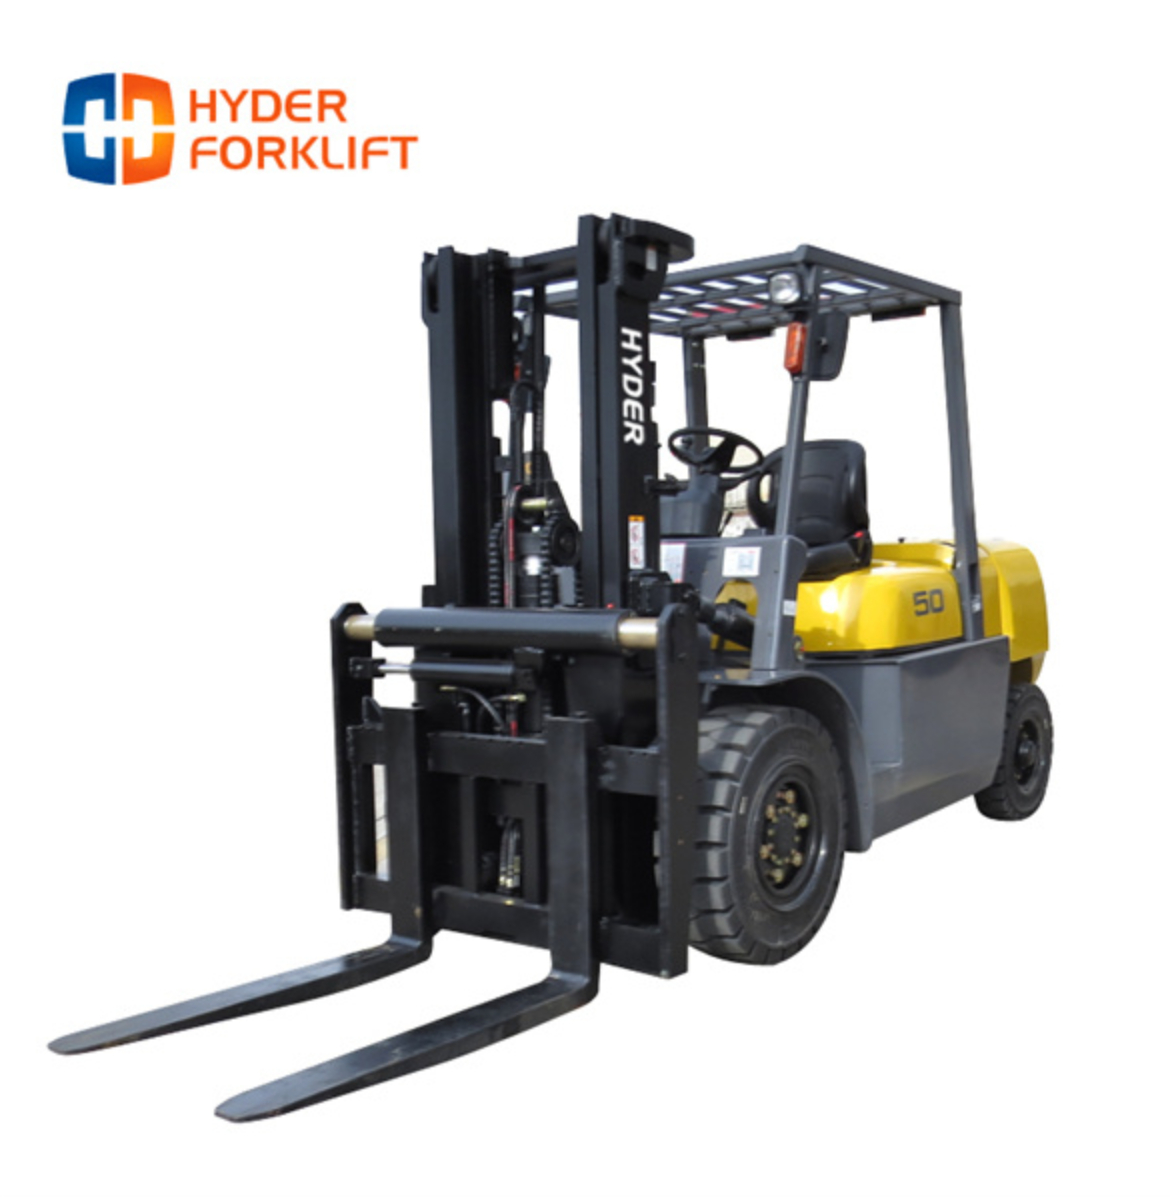 High quality diesel forklift with Japanese engine